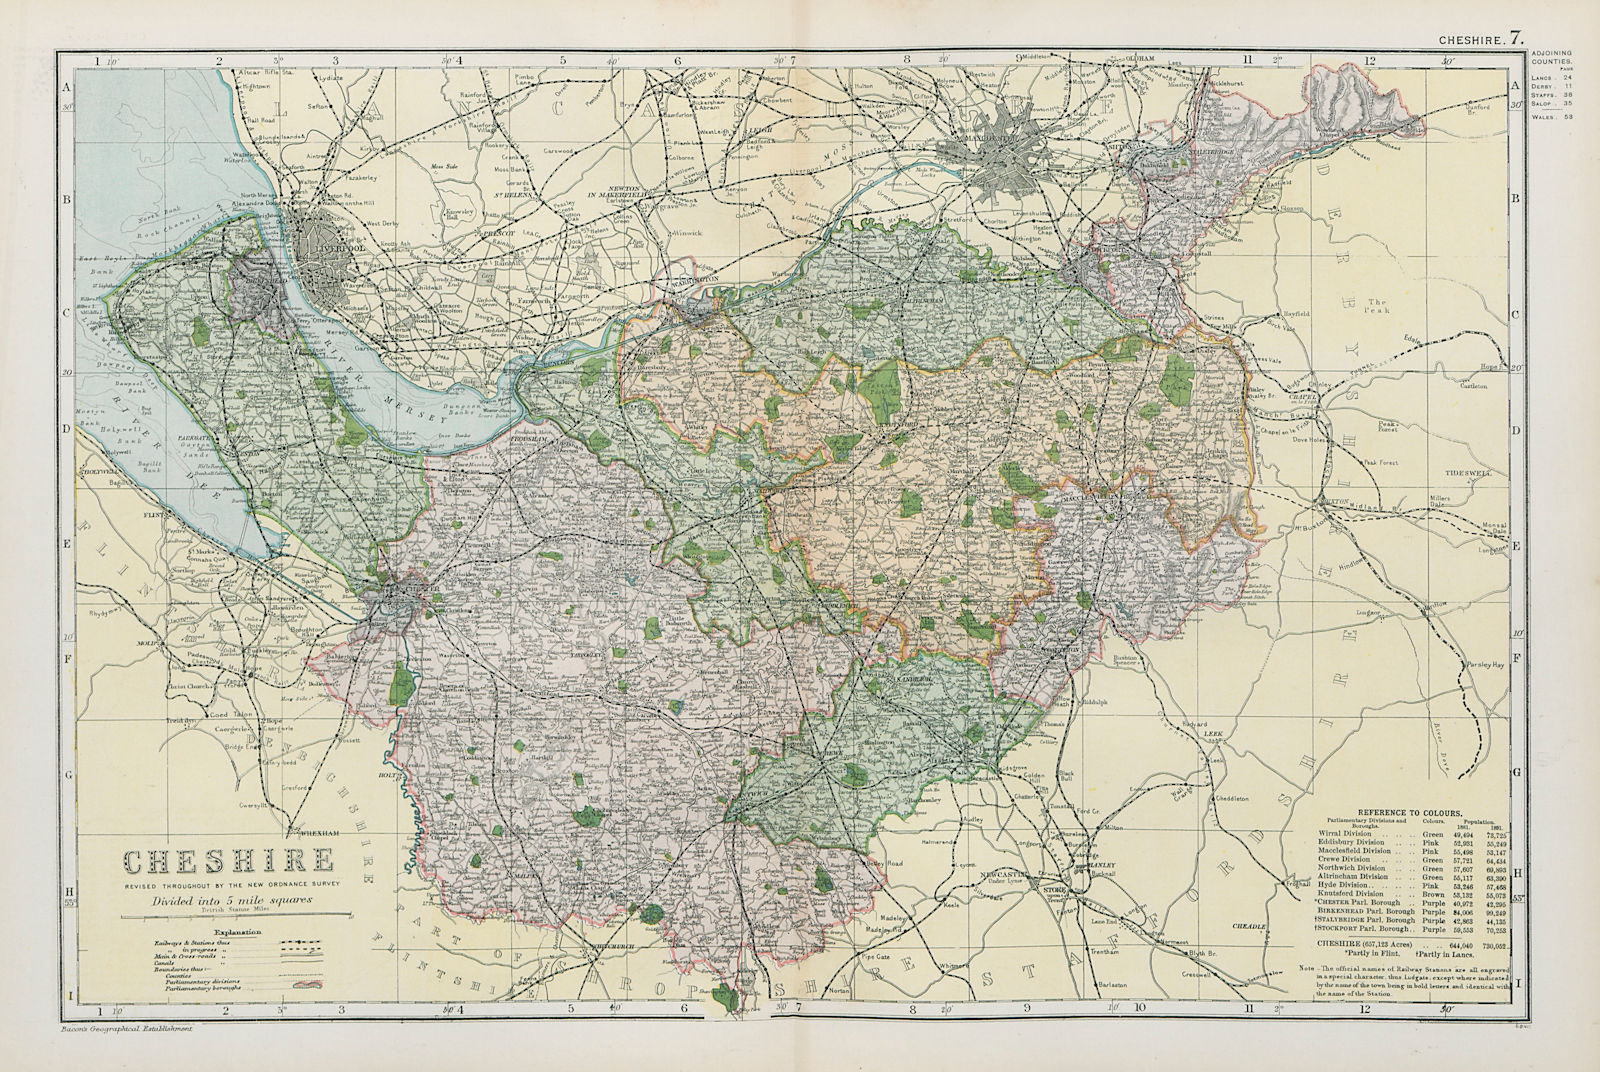 CHESHIRE. Showing Parliamentary divisions, boroughs & parks. BACON 1900 map